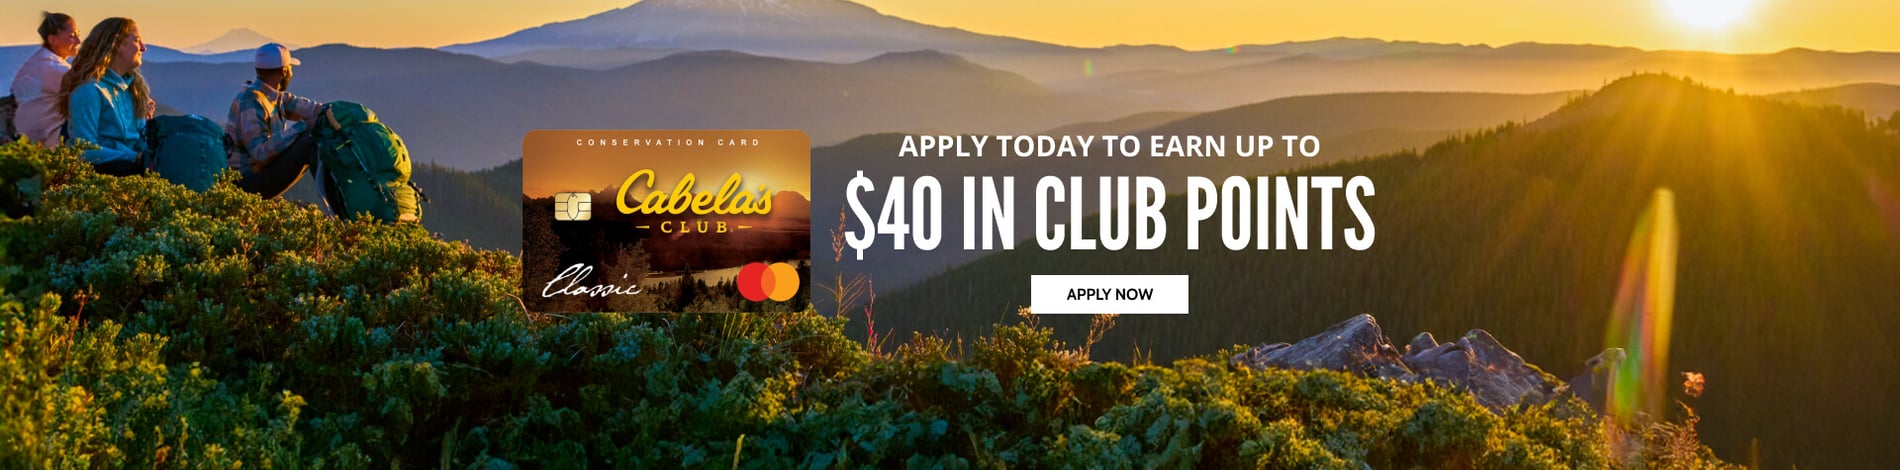 Earn up to $40 in CLUB points!